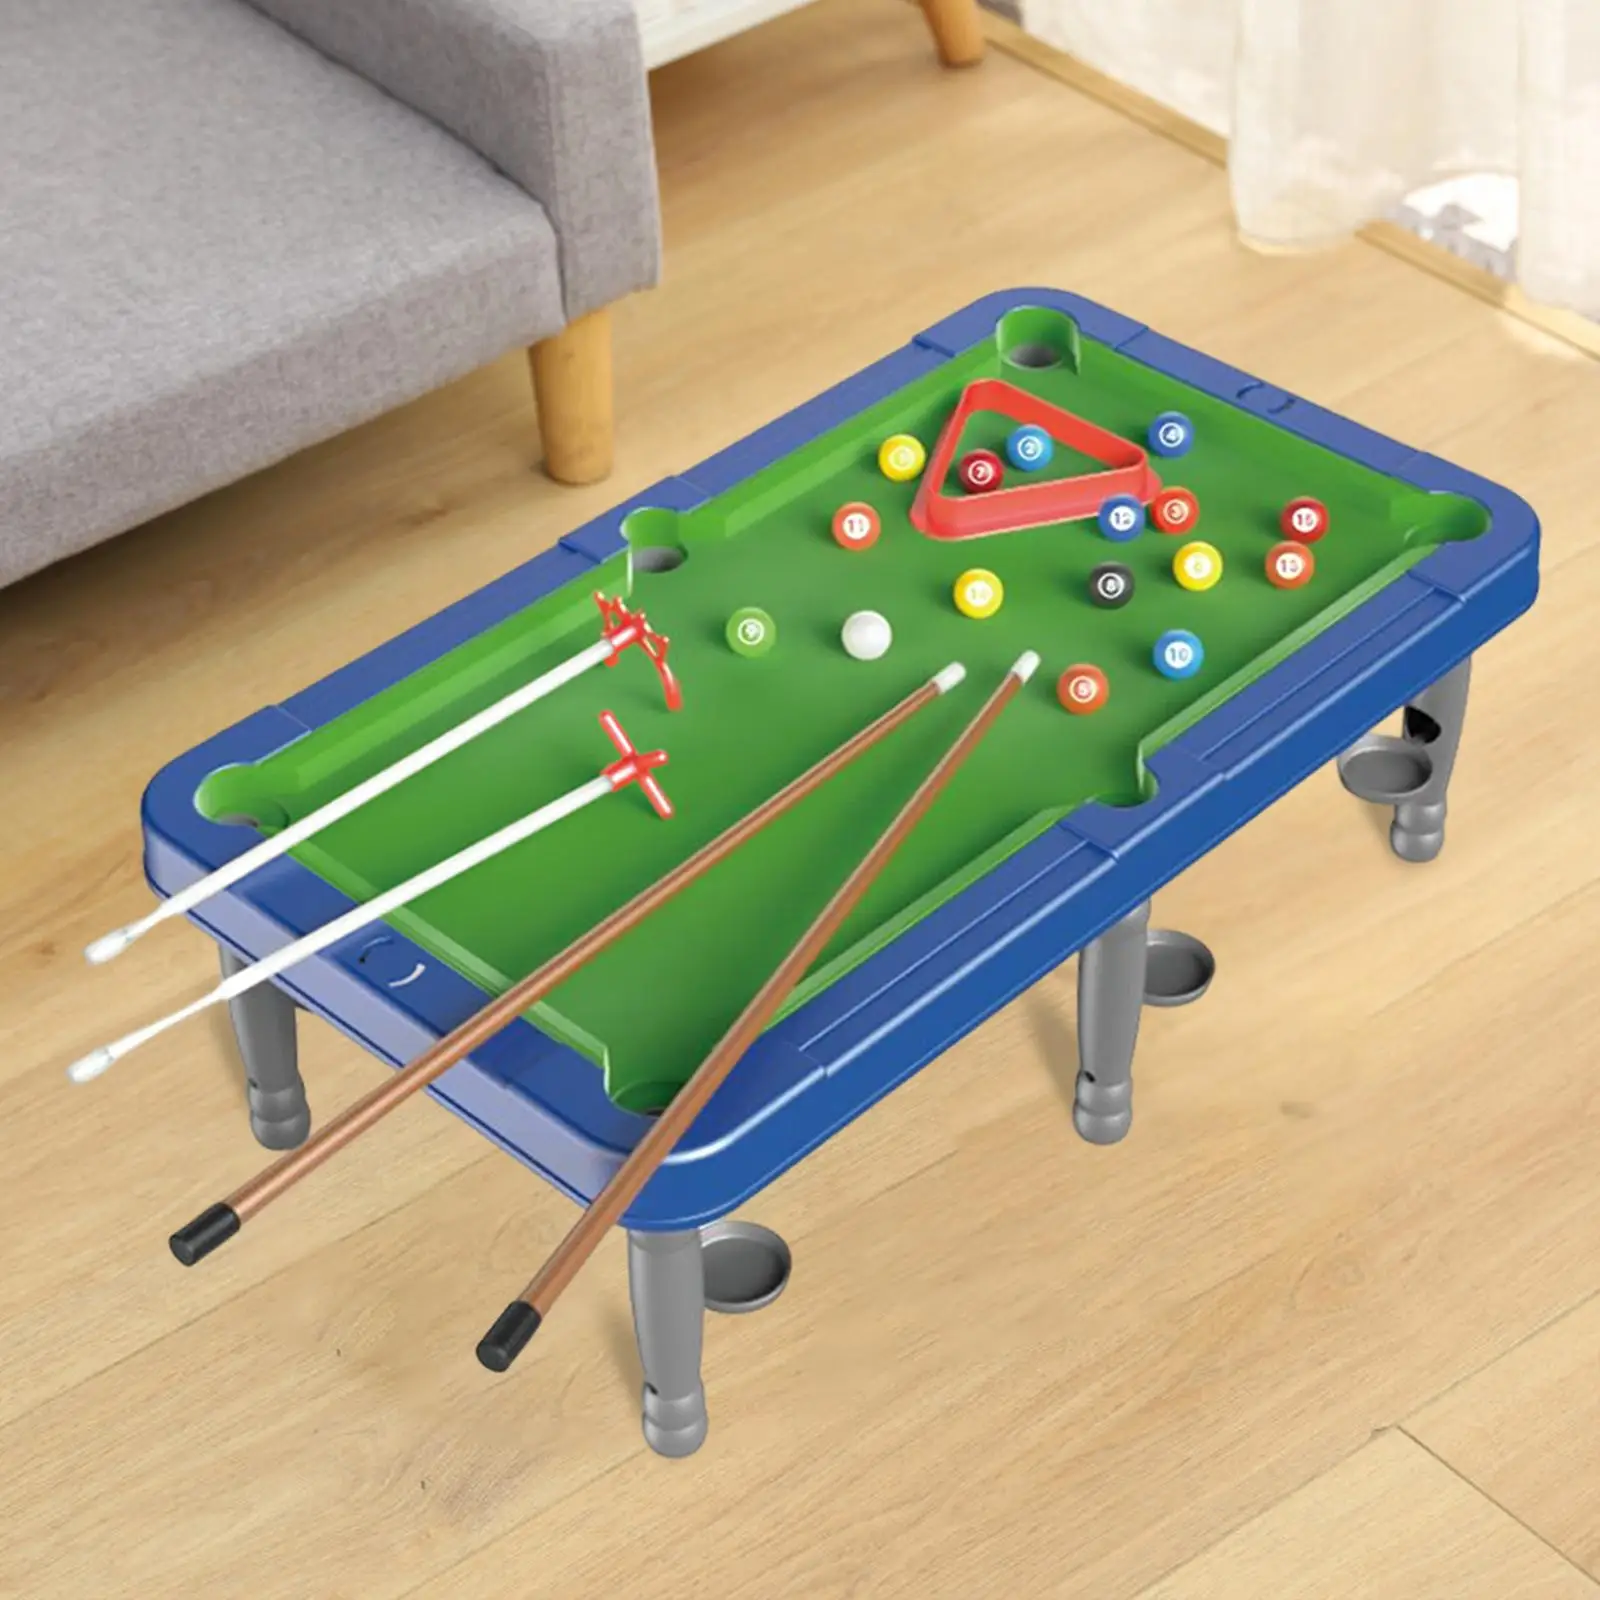 Tabletop Billiards Office Use Chalk, Triangle Rack Interaction Toys Billiard Cues Tabletop Billiards Game for Adults Family Kids